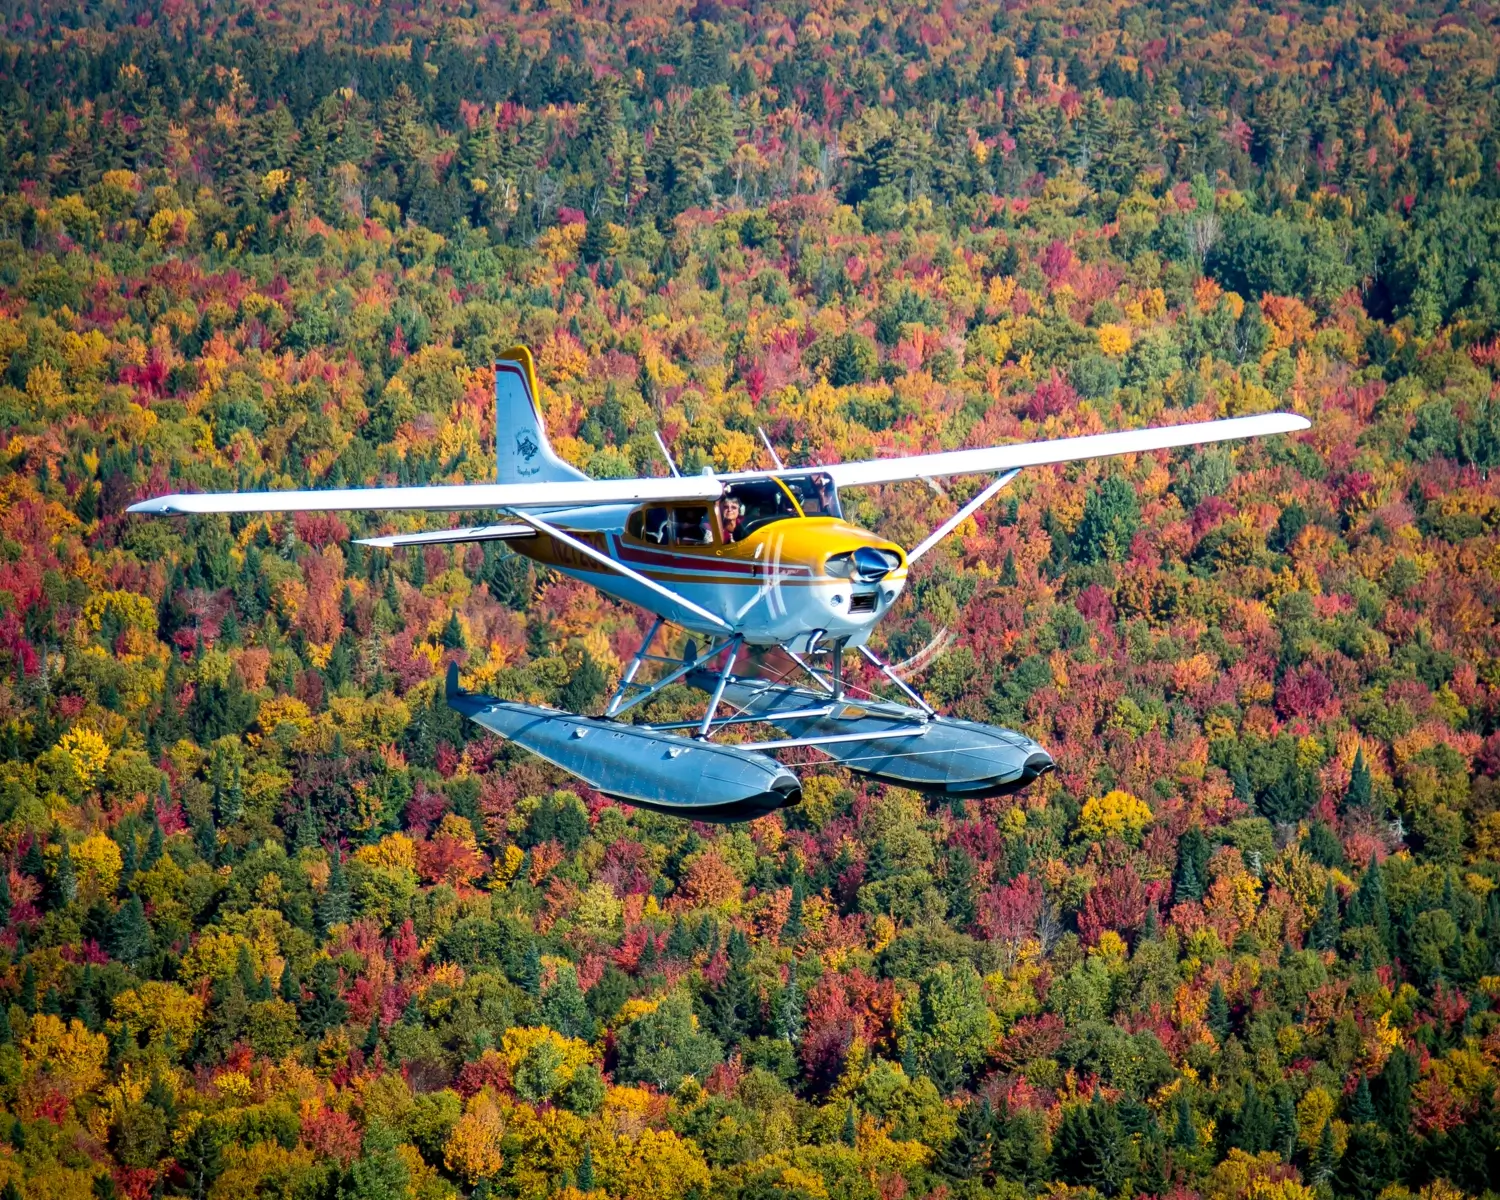 A water plane flying over a forest in autumn